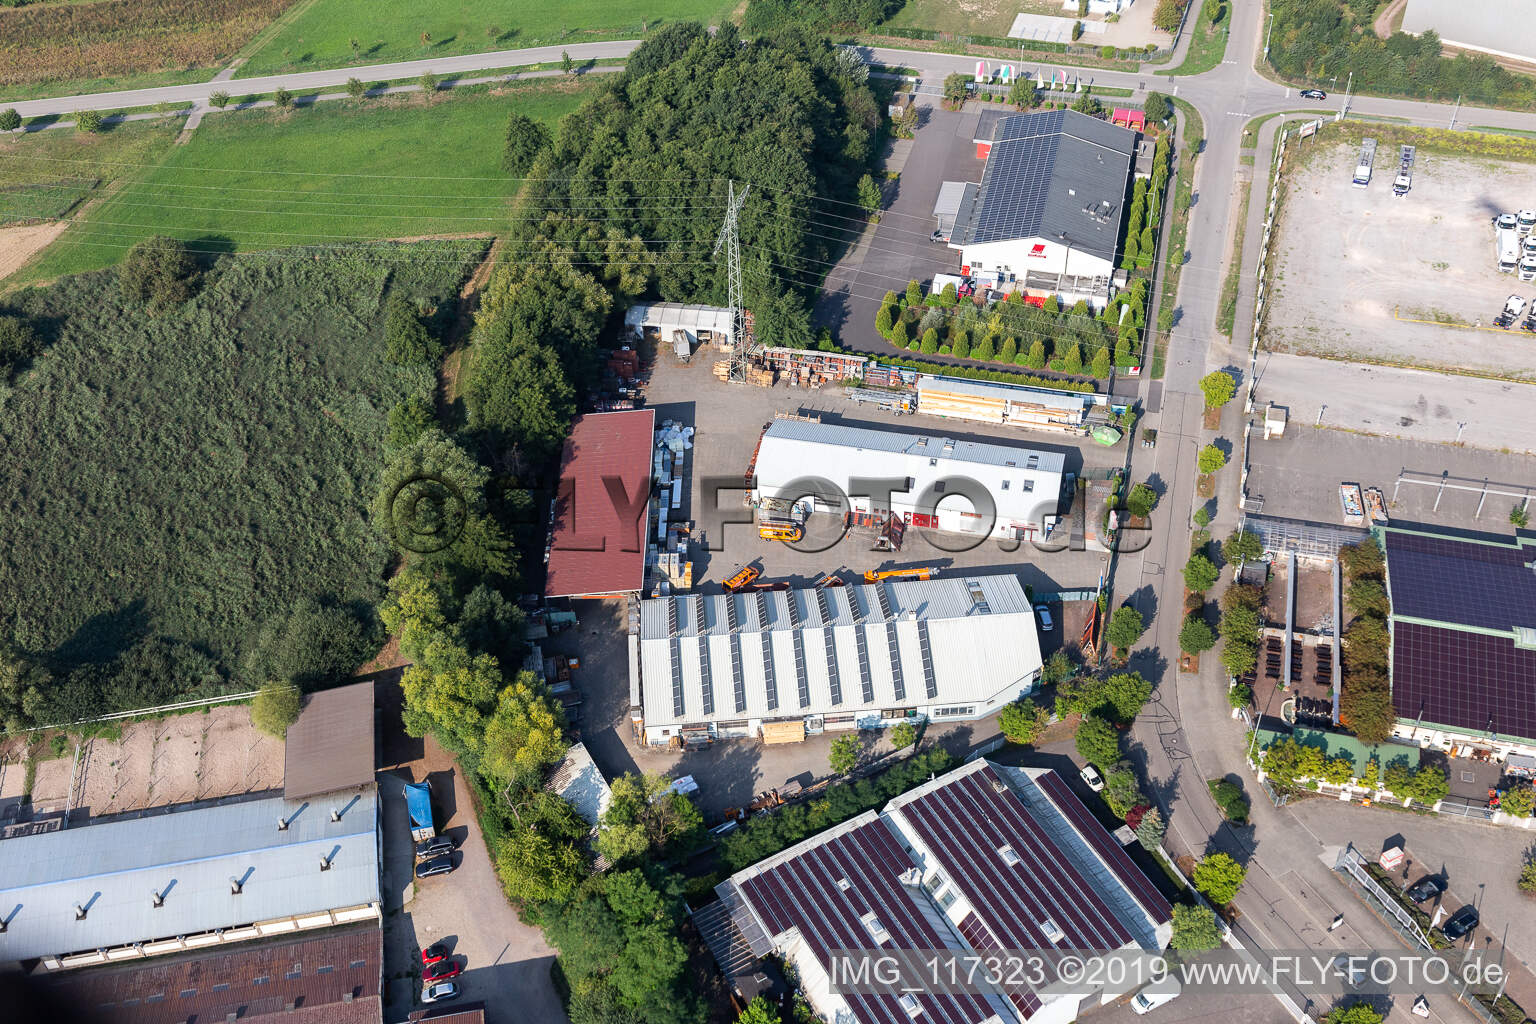 Roofing, scaffolding and plumbing in Mindum, in the Horst industrial area in the district Minderslachen in Kandel in the state Rhineland-Palatinate, Germany from above